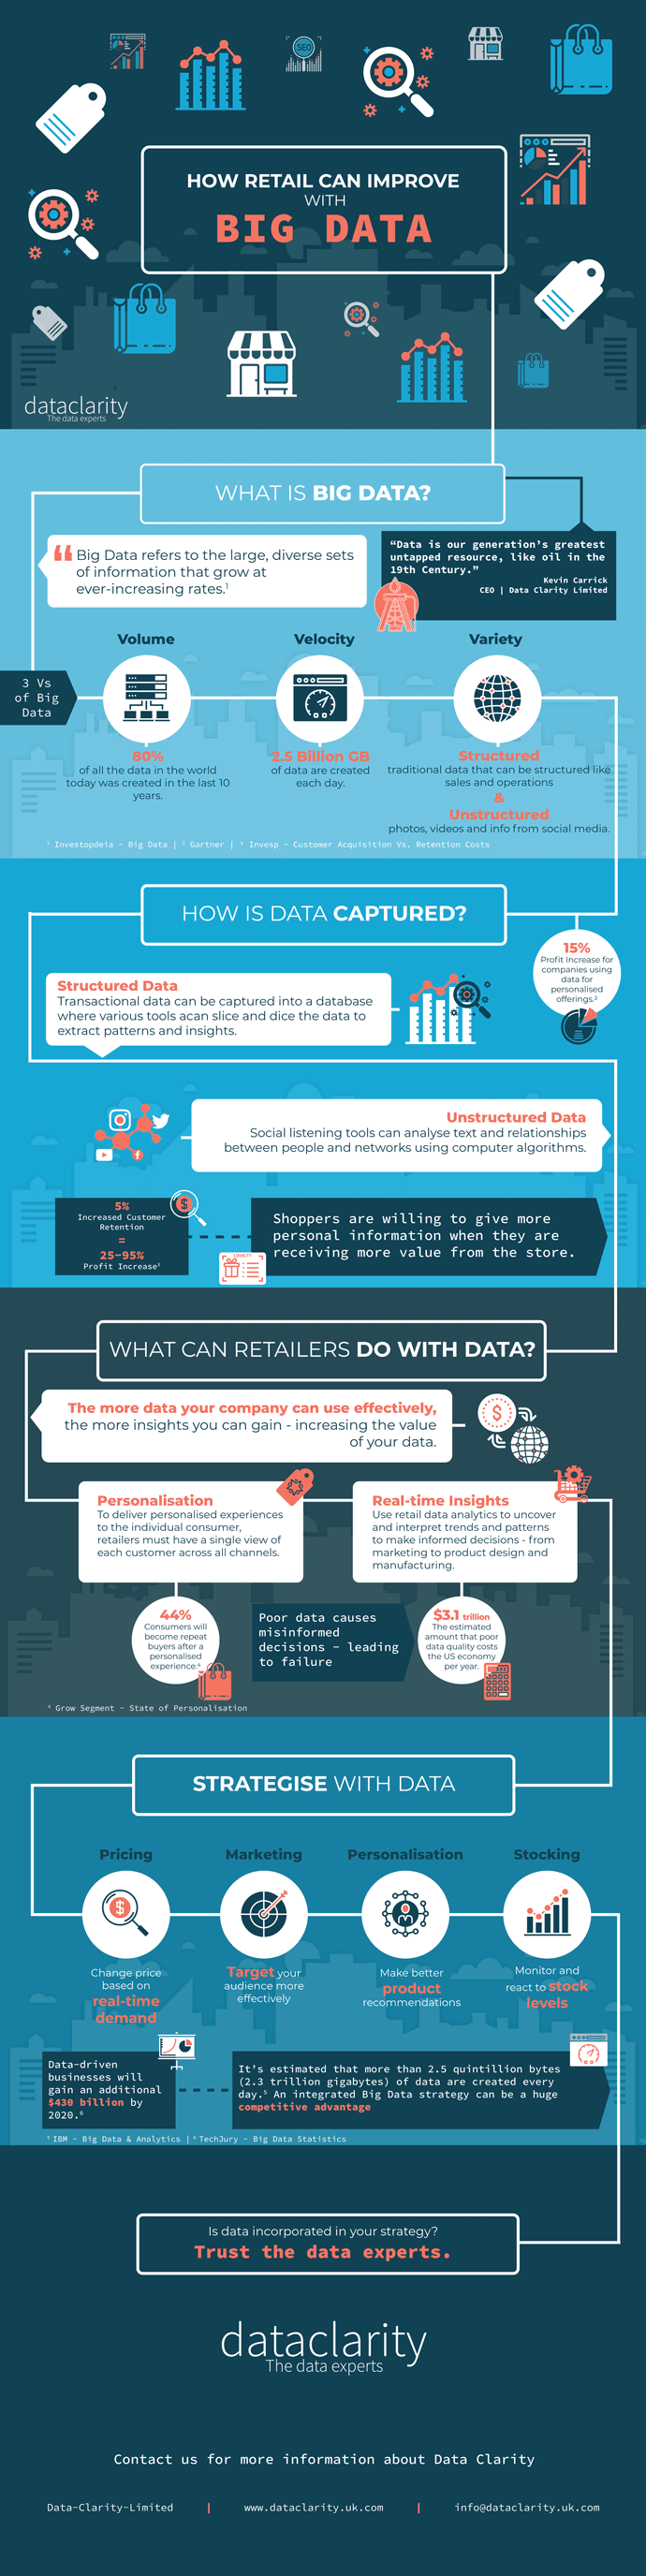 5 Myths Marketers Believe About Big Data (Infographic) - Business 2 Community